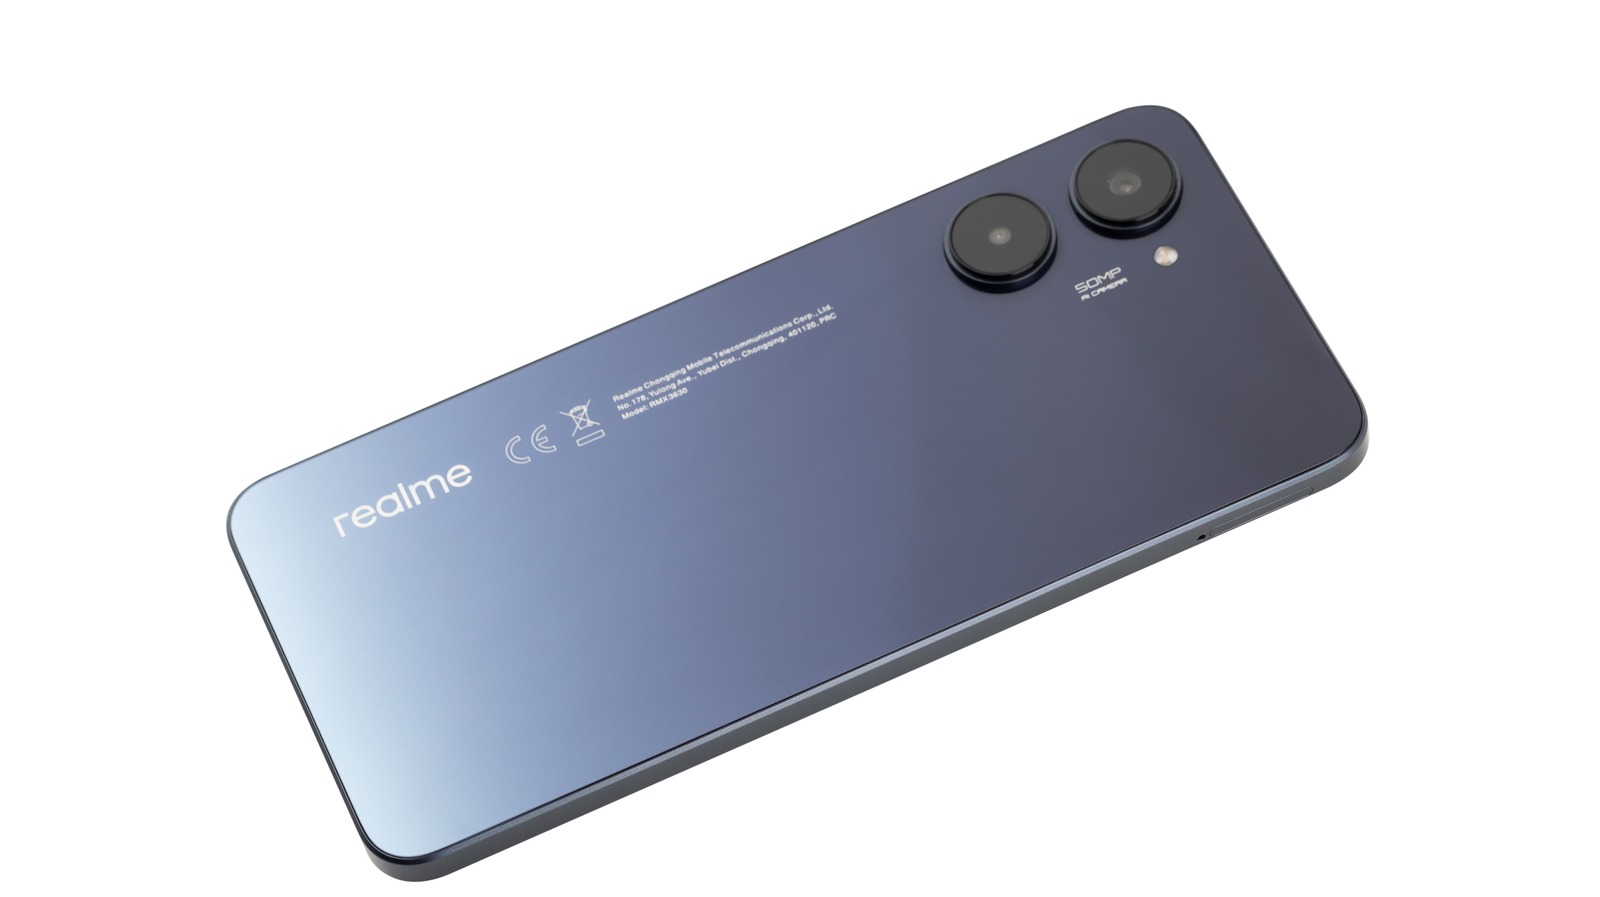 Best realme smartphones and offers - realme (India)